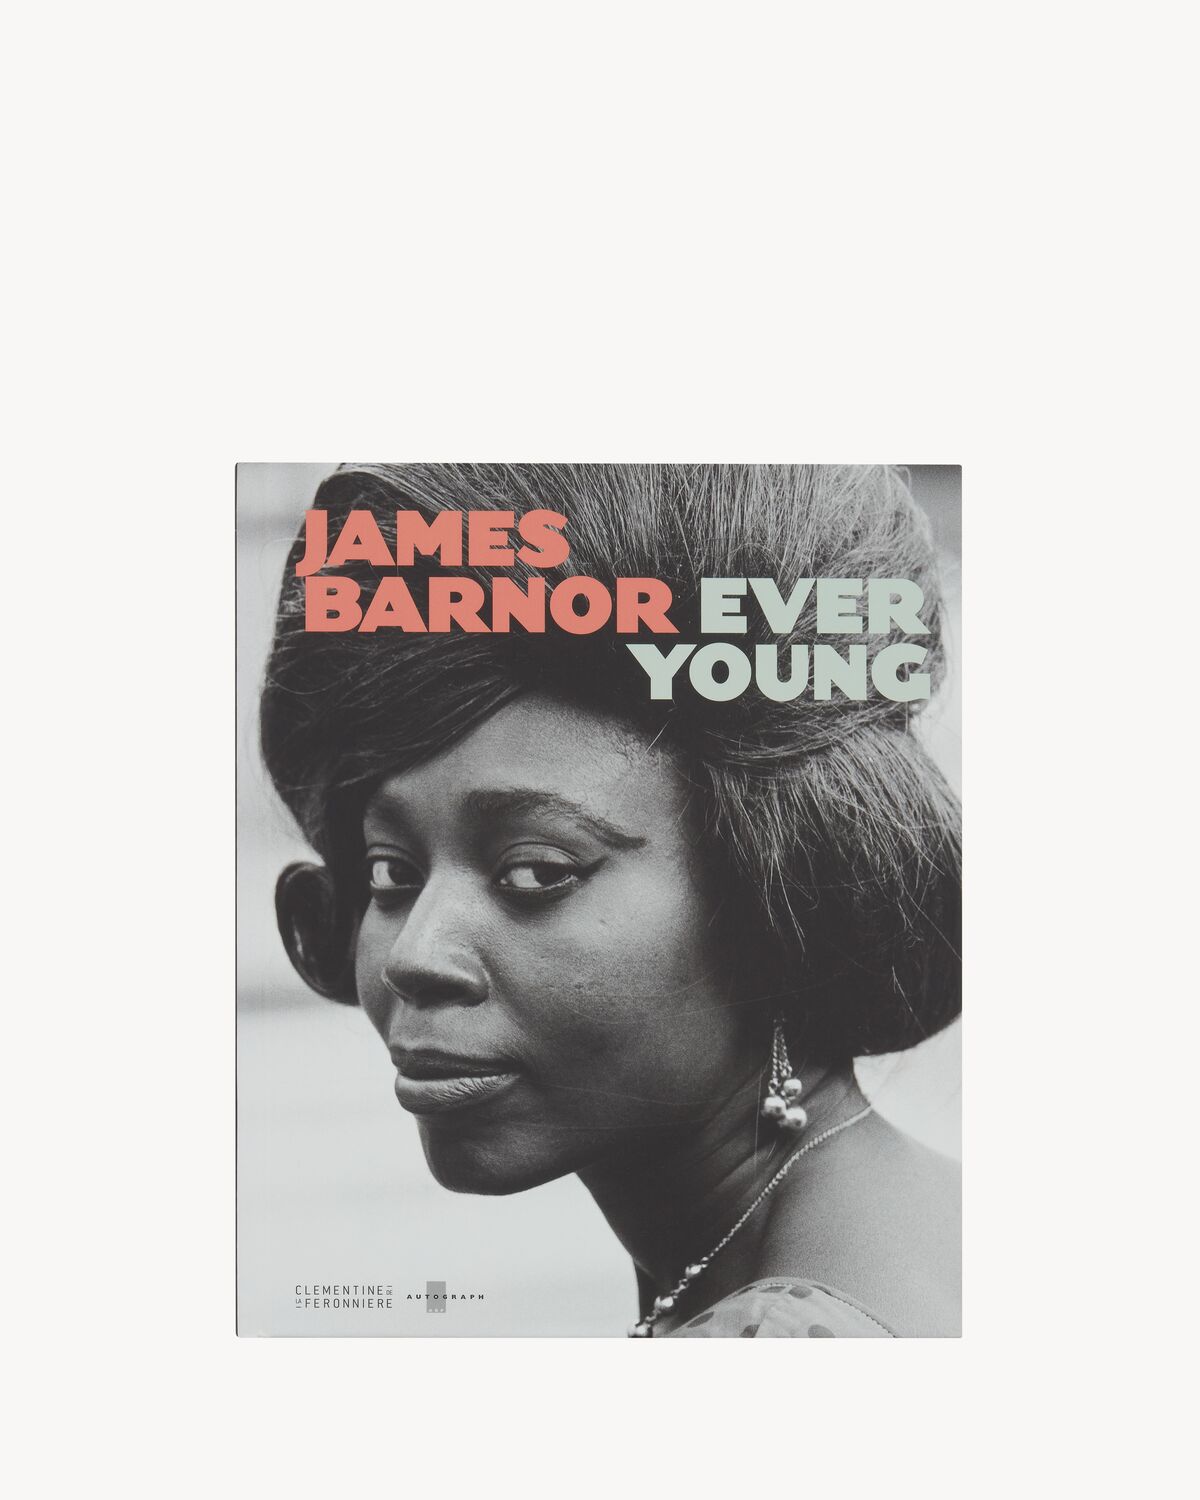 JAMES BARNOR EVER YOUNG